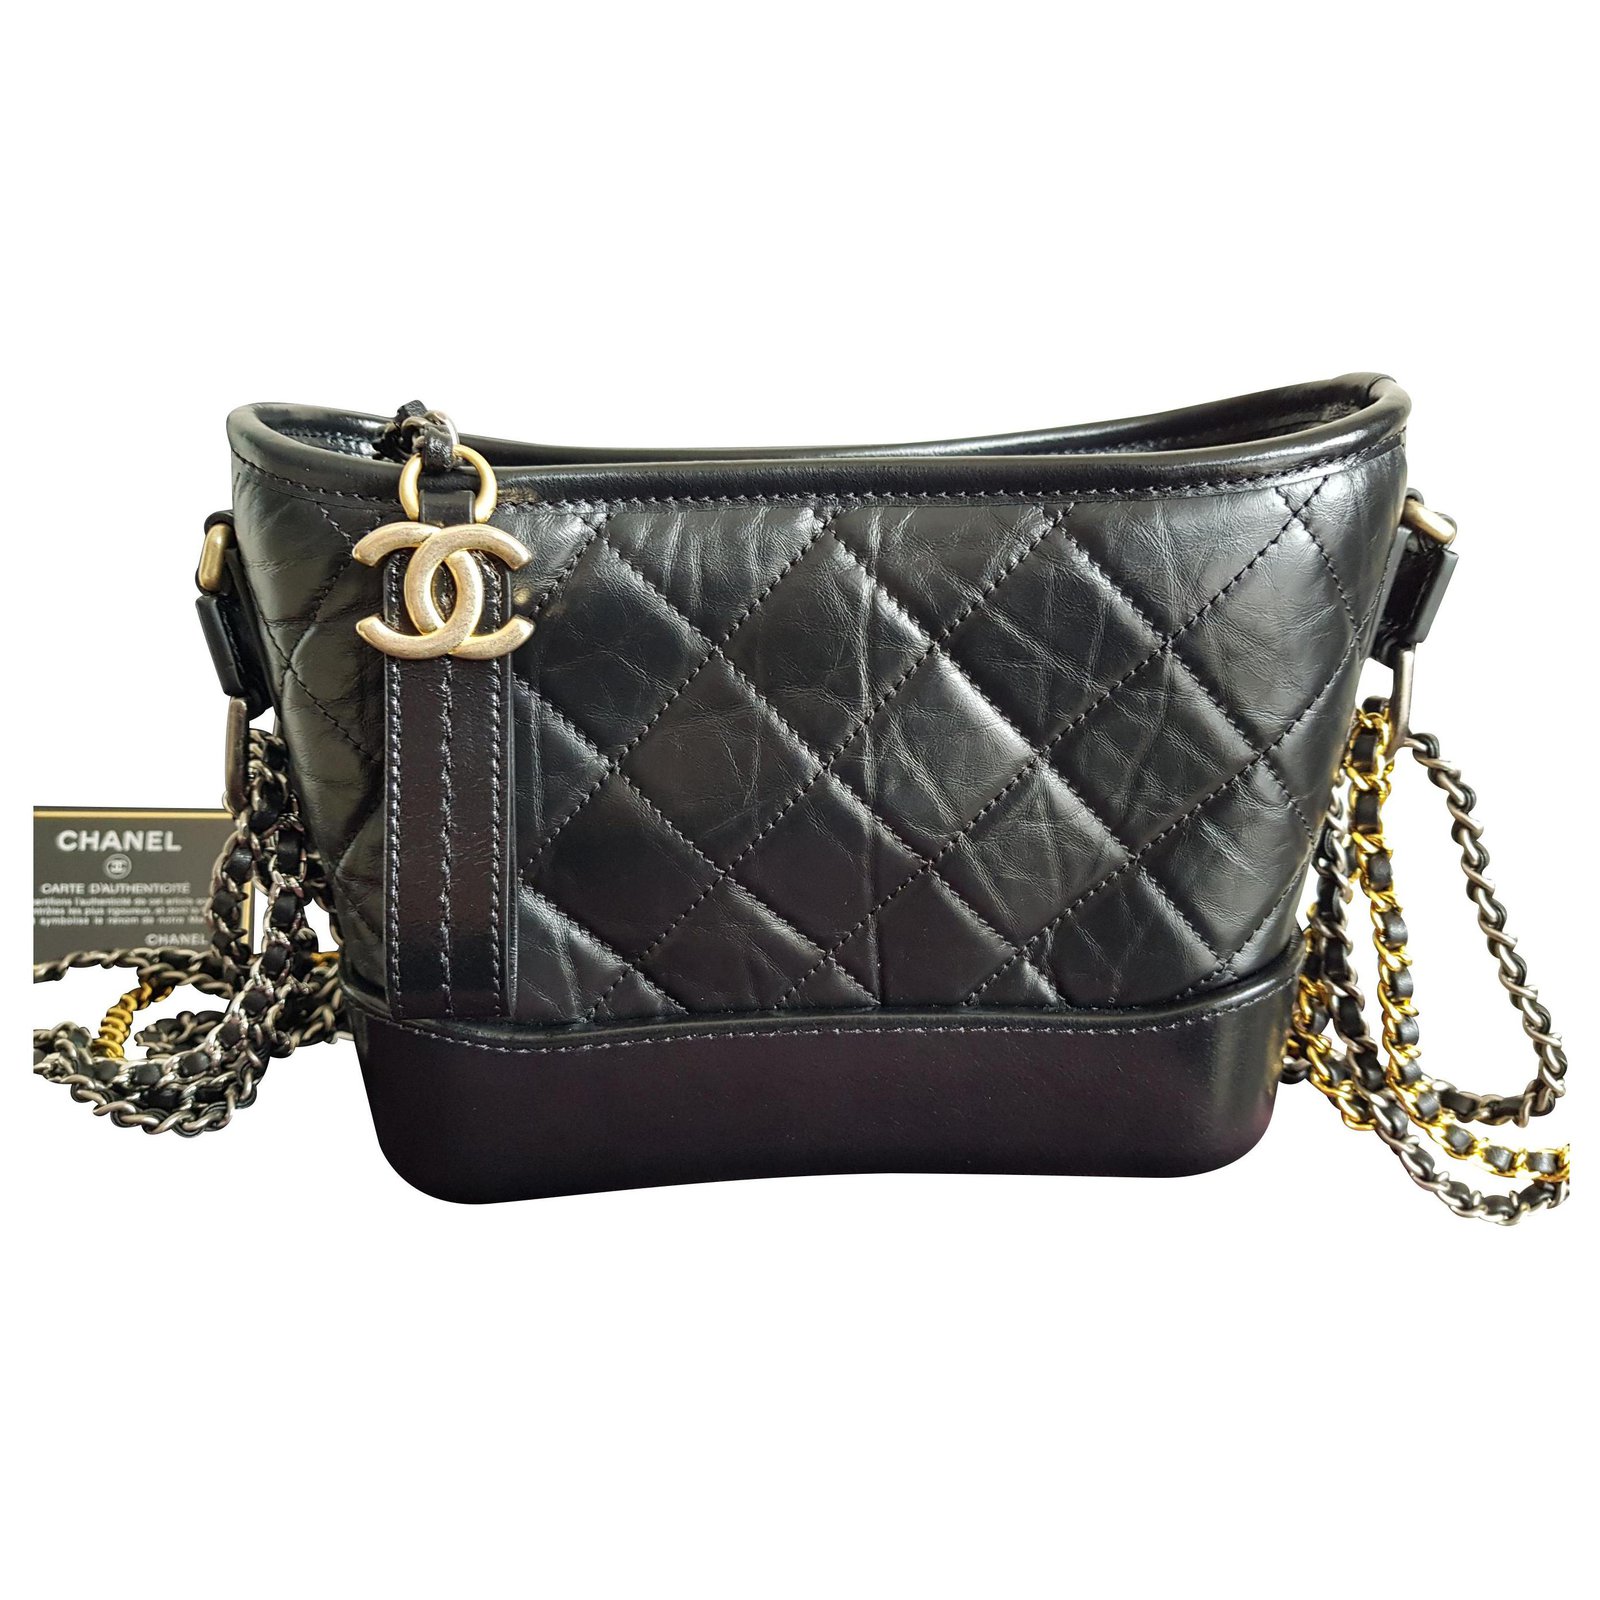 Chanel Silver Quilted Leather Large Gabrielle Hobo Chanel